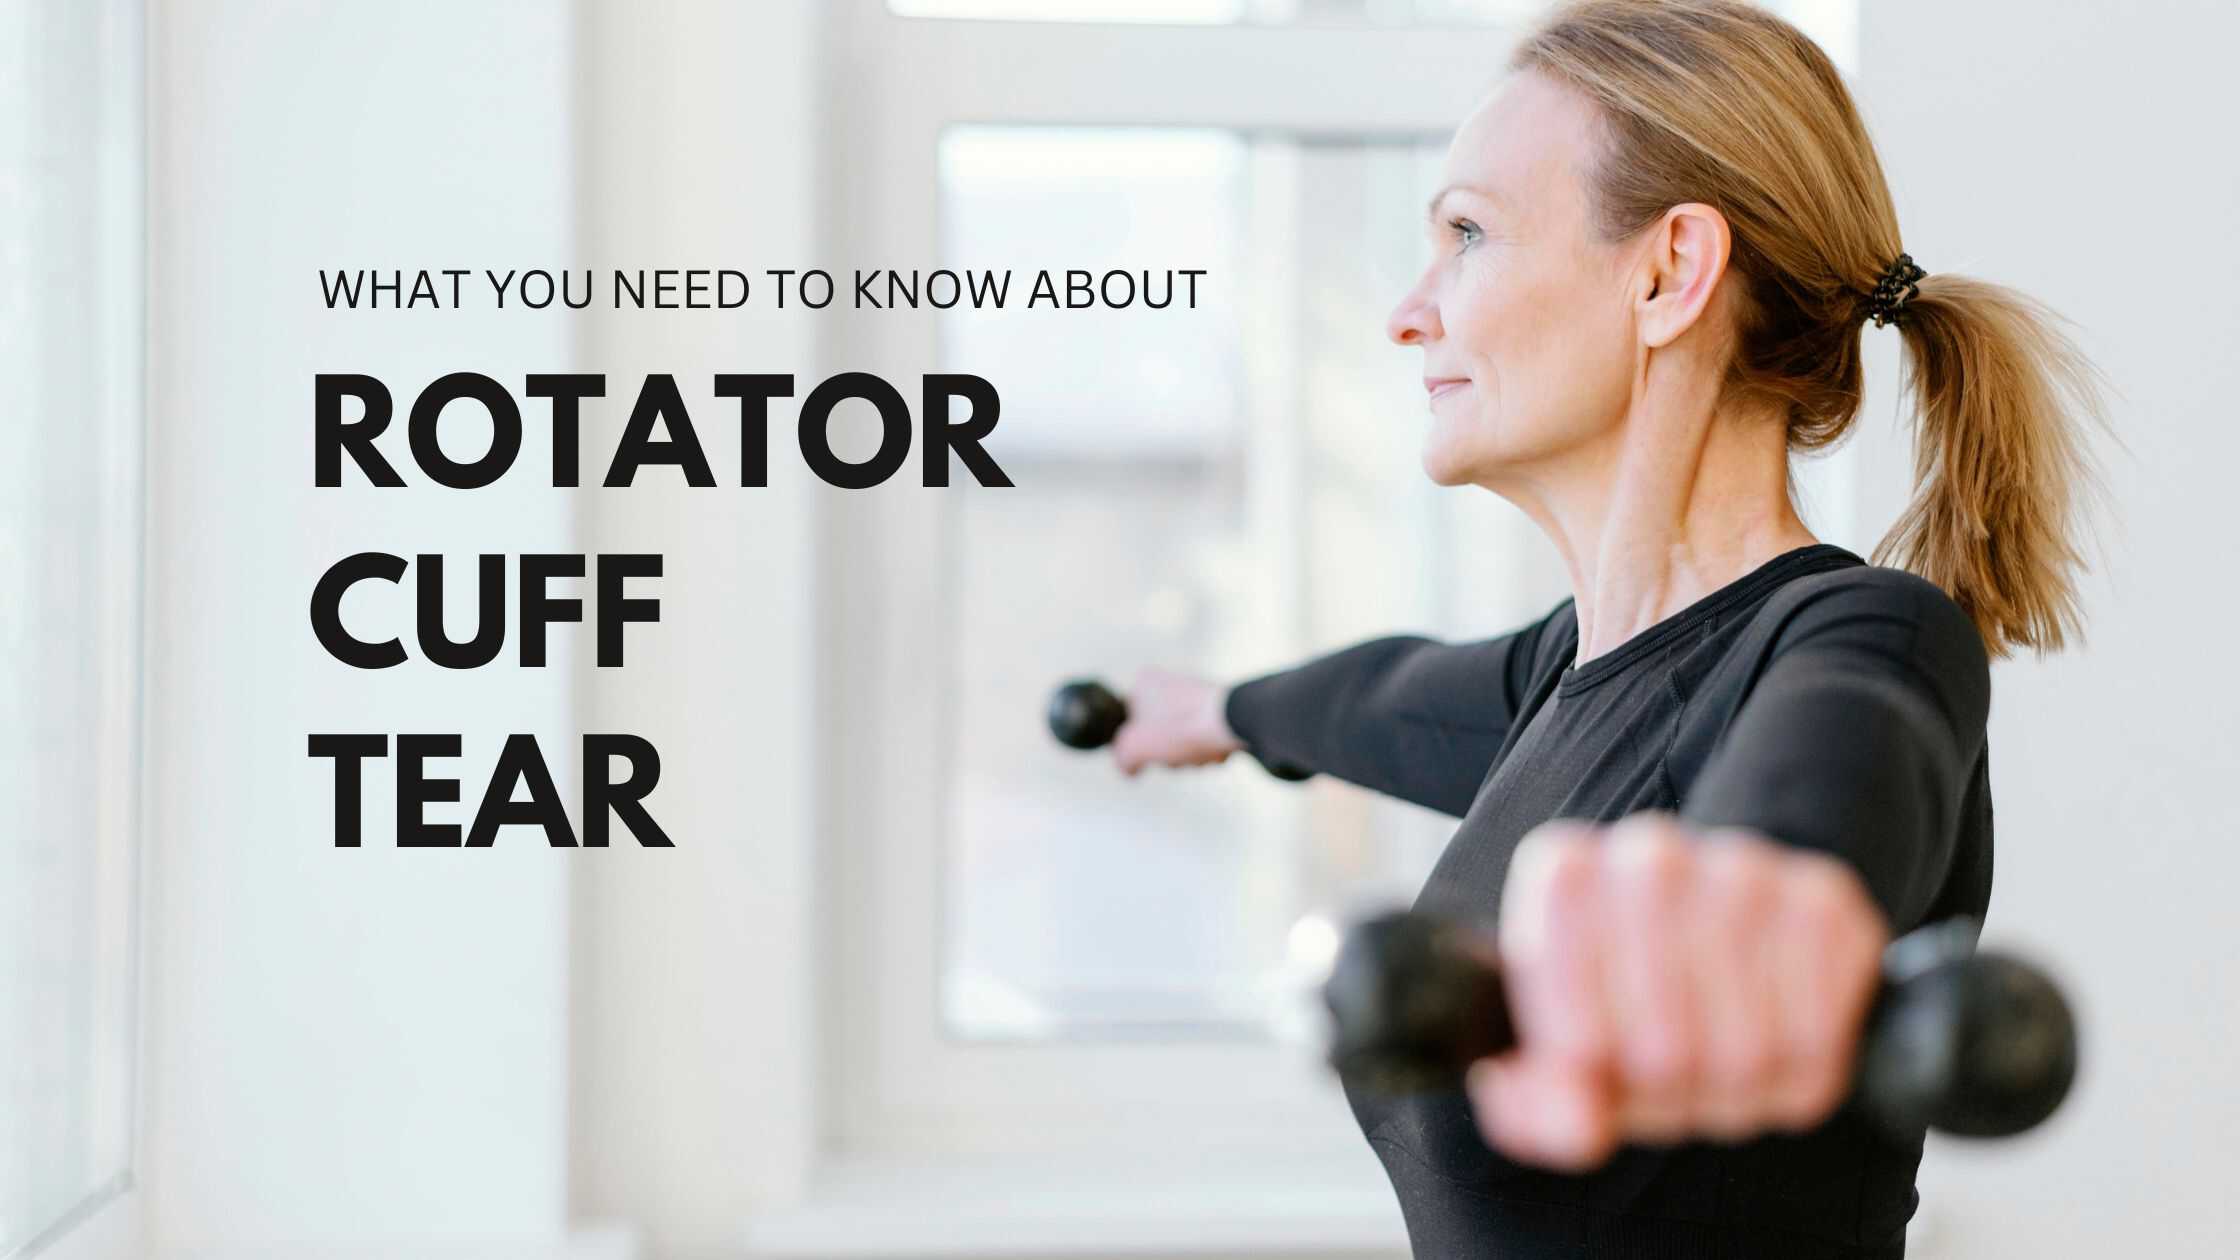 Rotator Cuff tear: facts, training, and things you need to know